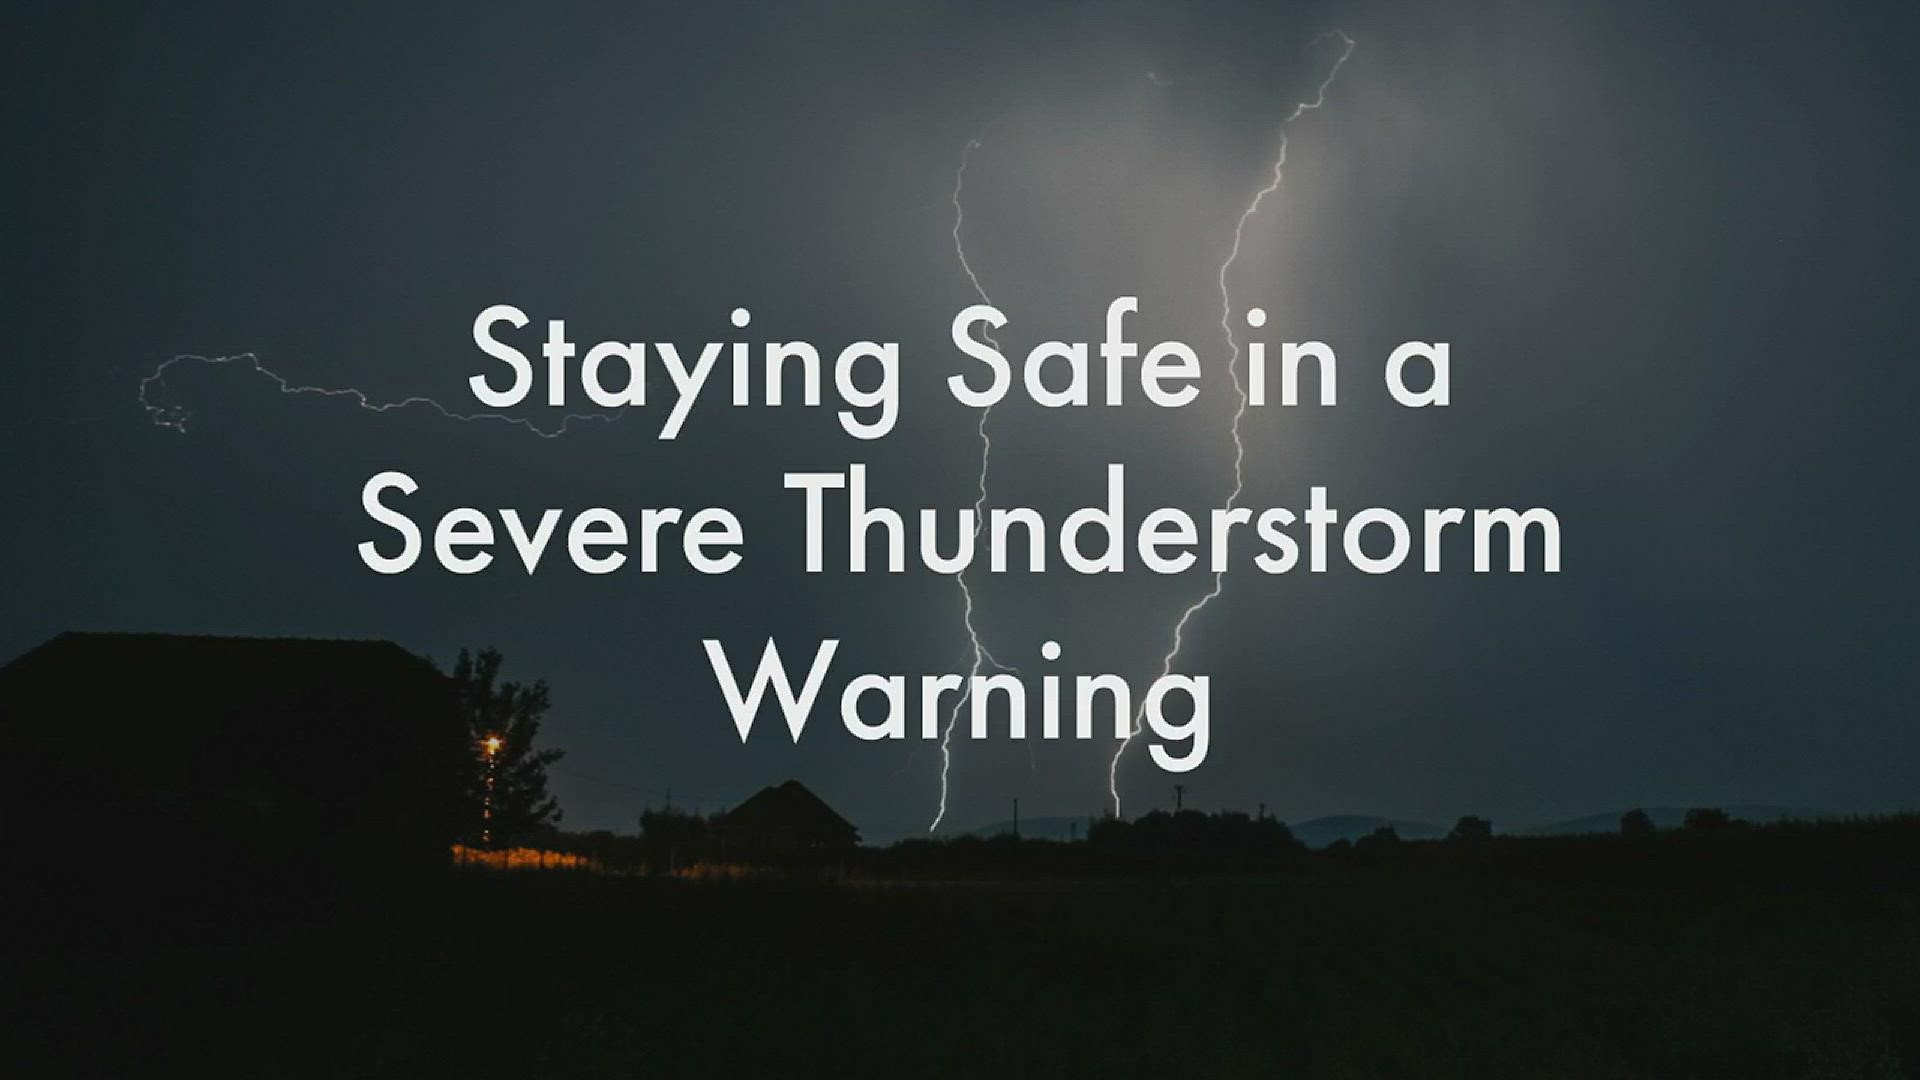 Tips to stay safe in a severe thunderstorm warning